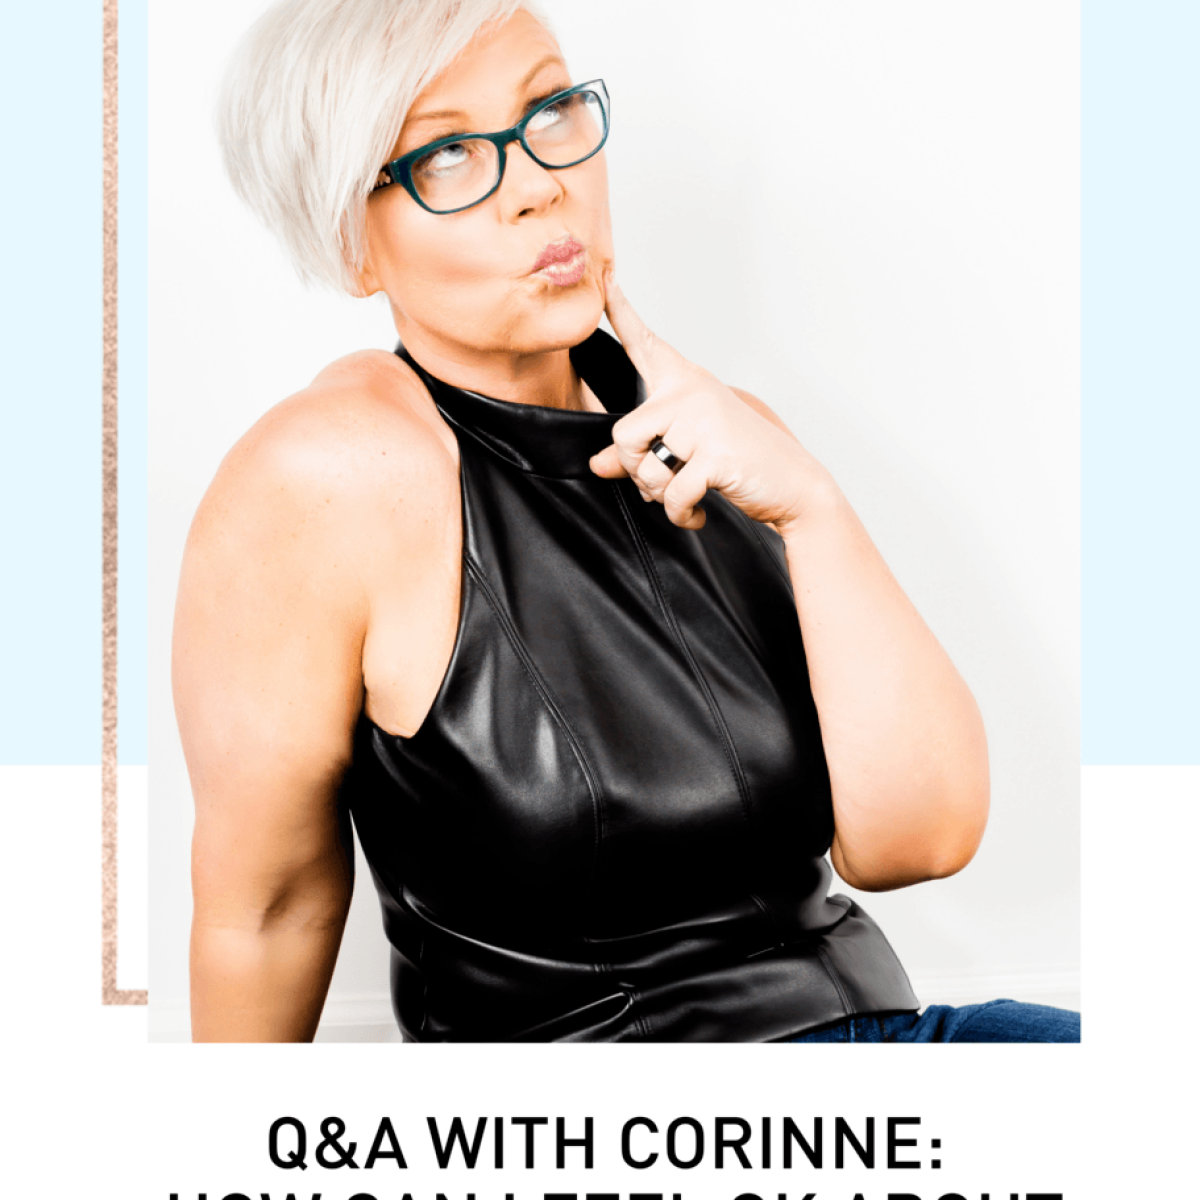 Q&a with corinne how do i feel about not eating when i'm not hungry?.